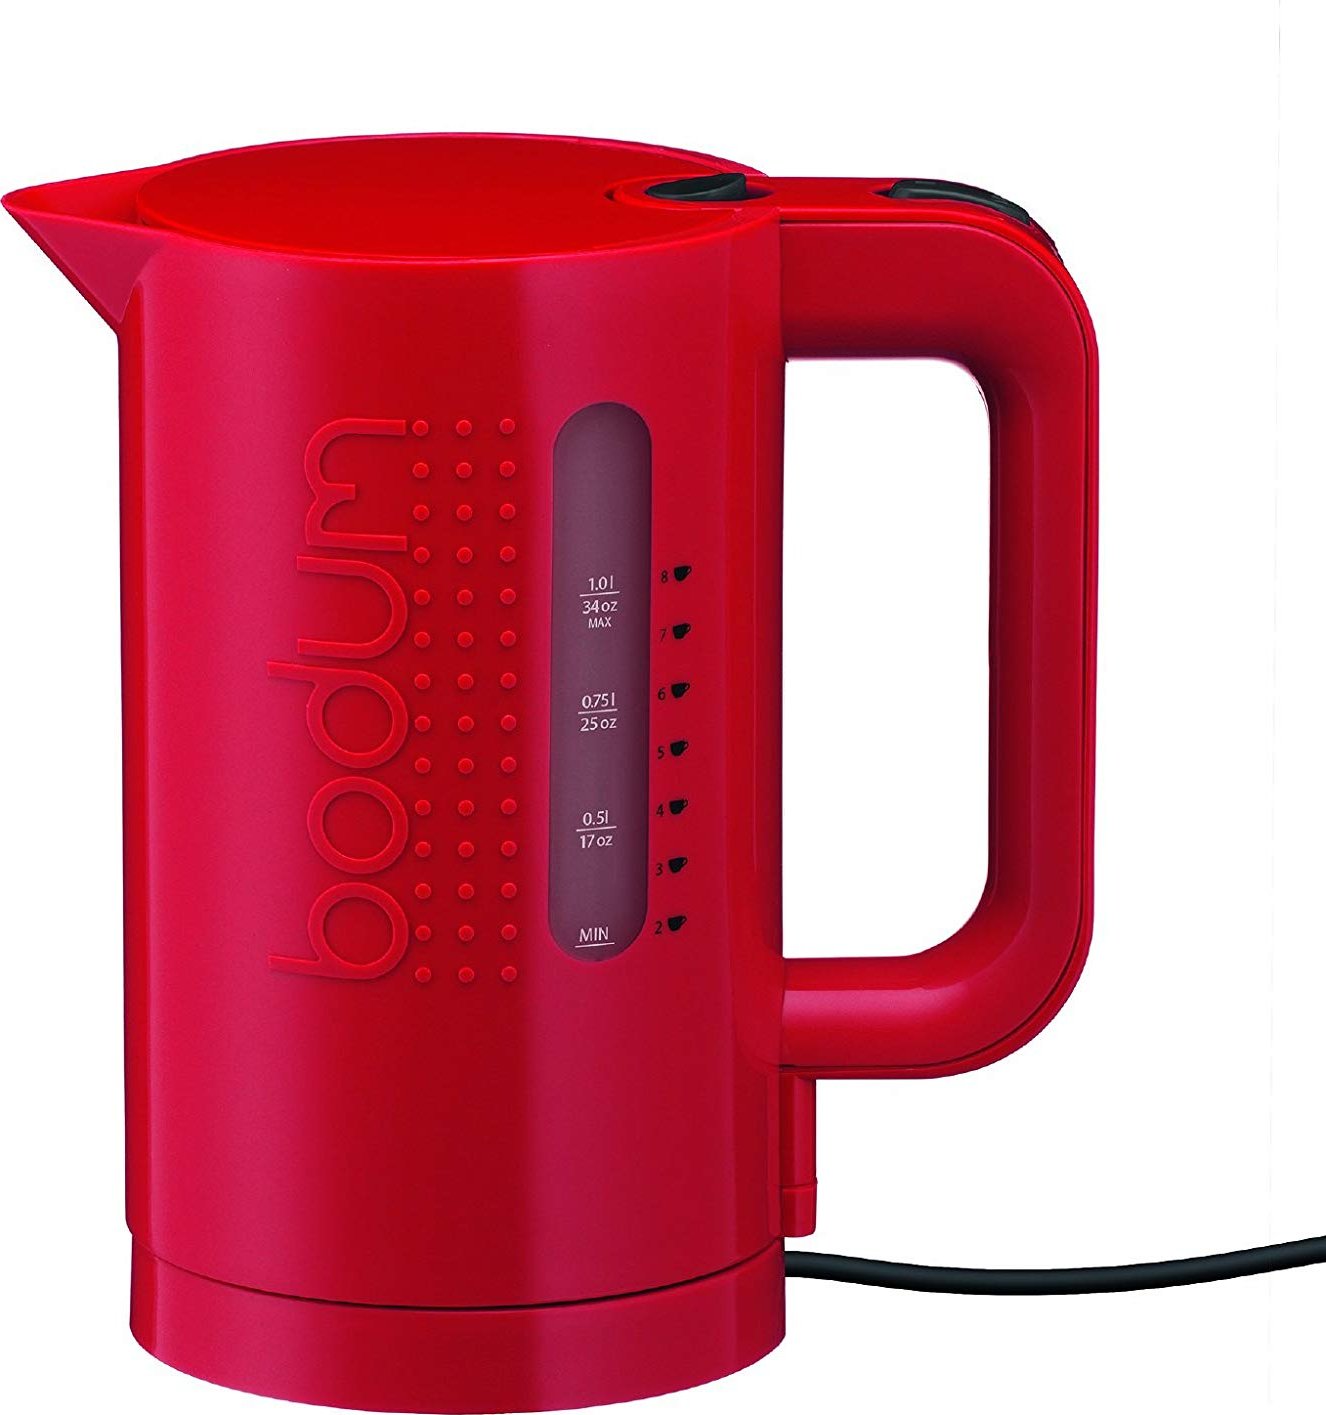 Bodum - Electric Water Kettle 34 oz Red - 11452-294US